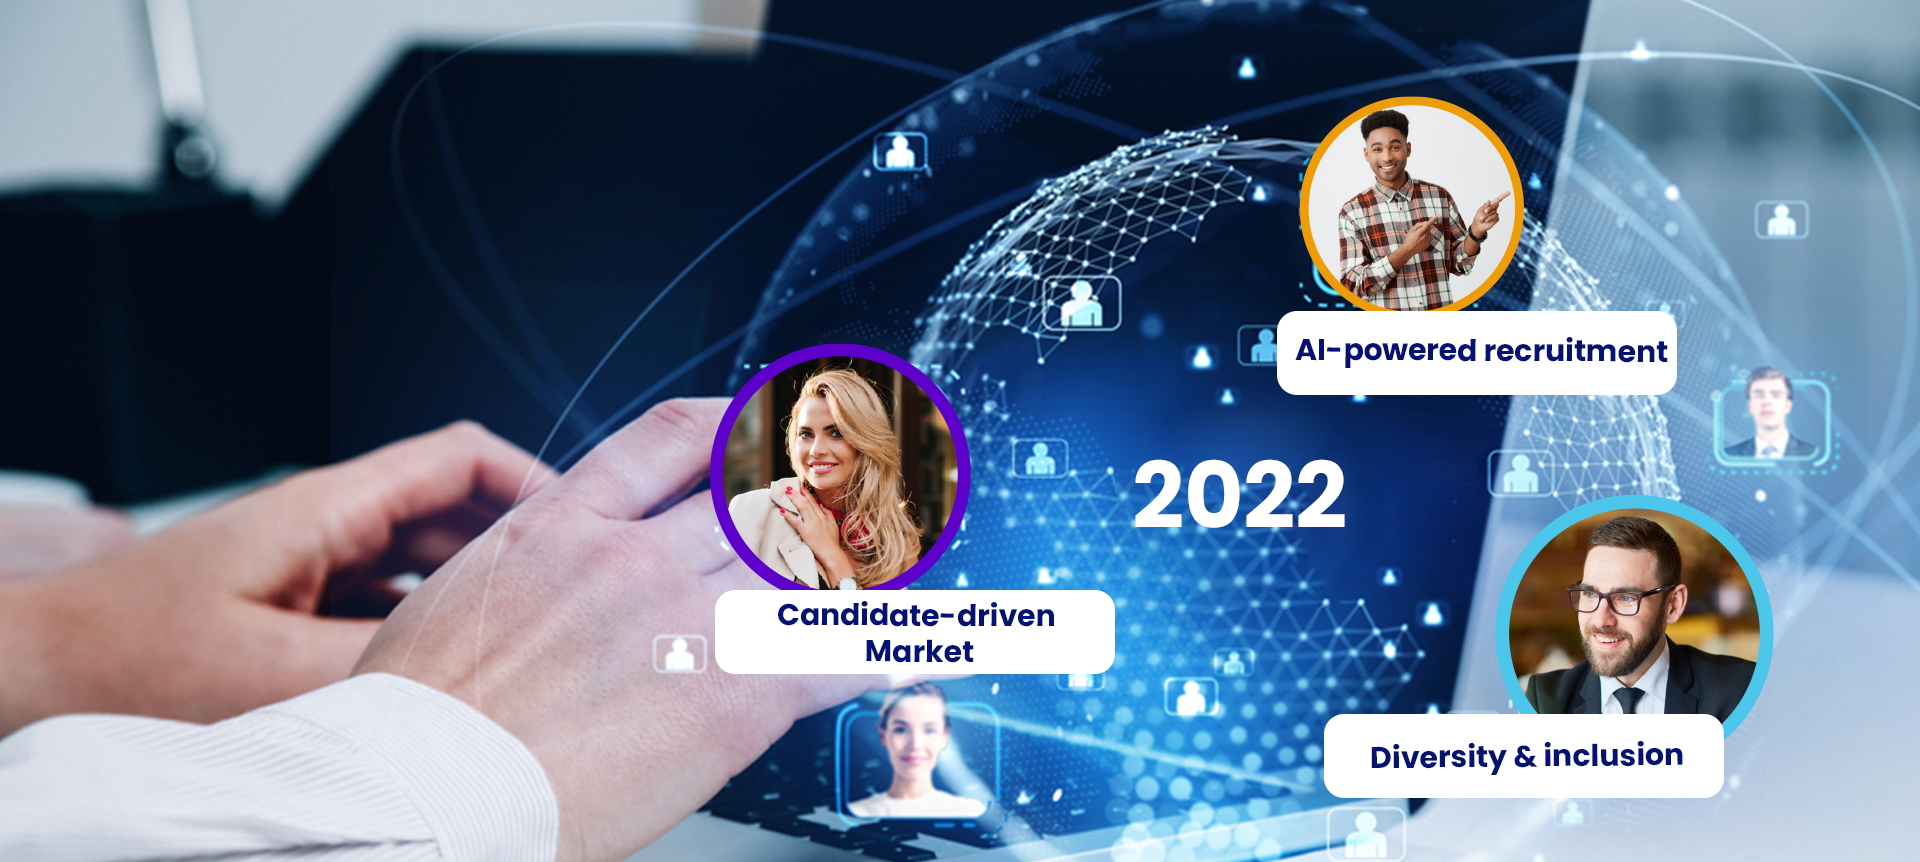 Powerful Recruitment Trends in 2022: What to Expect and How a Hiring Platform Will Help